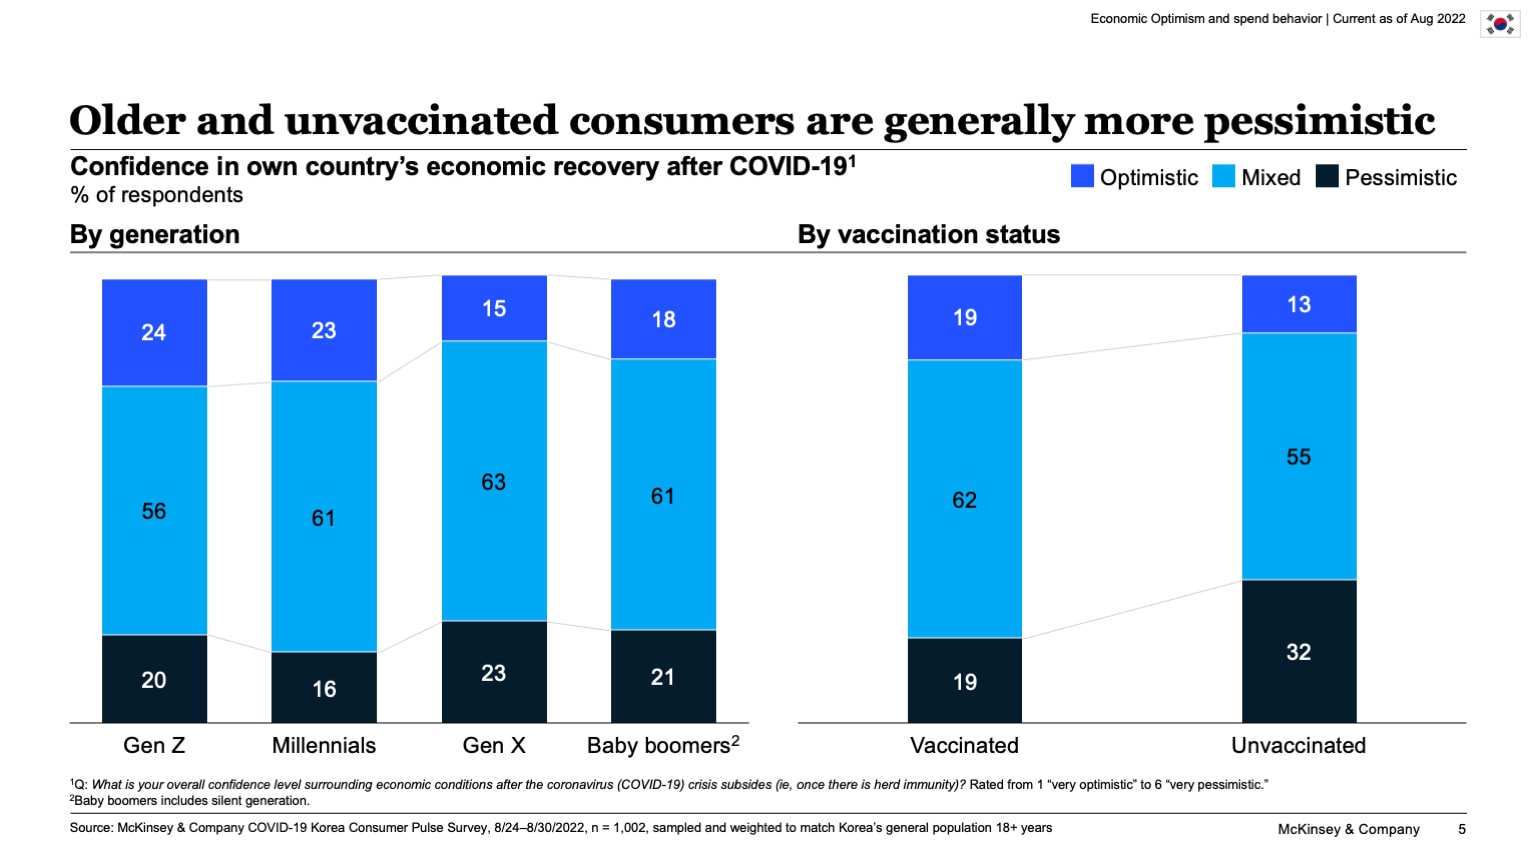 Older and unvaccinated consumers are generally more pessimistic